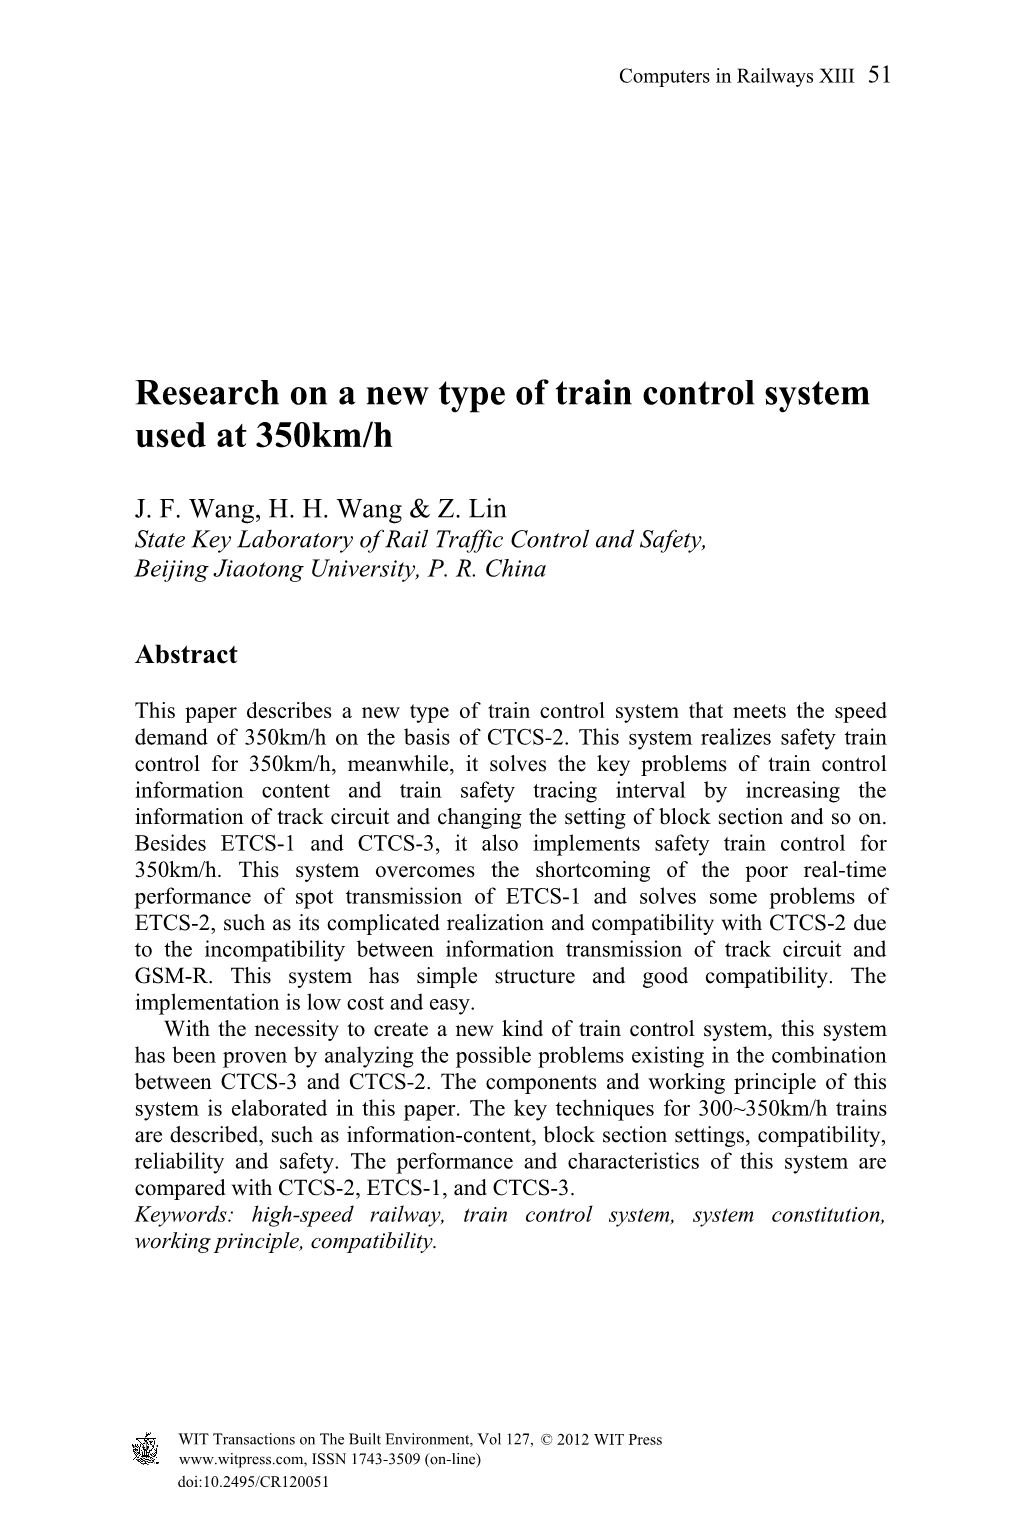 Research on a New Type of Train Control System Used at 350Km/H